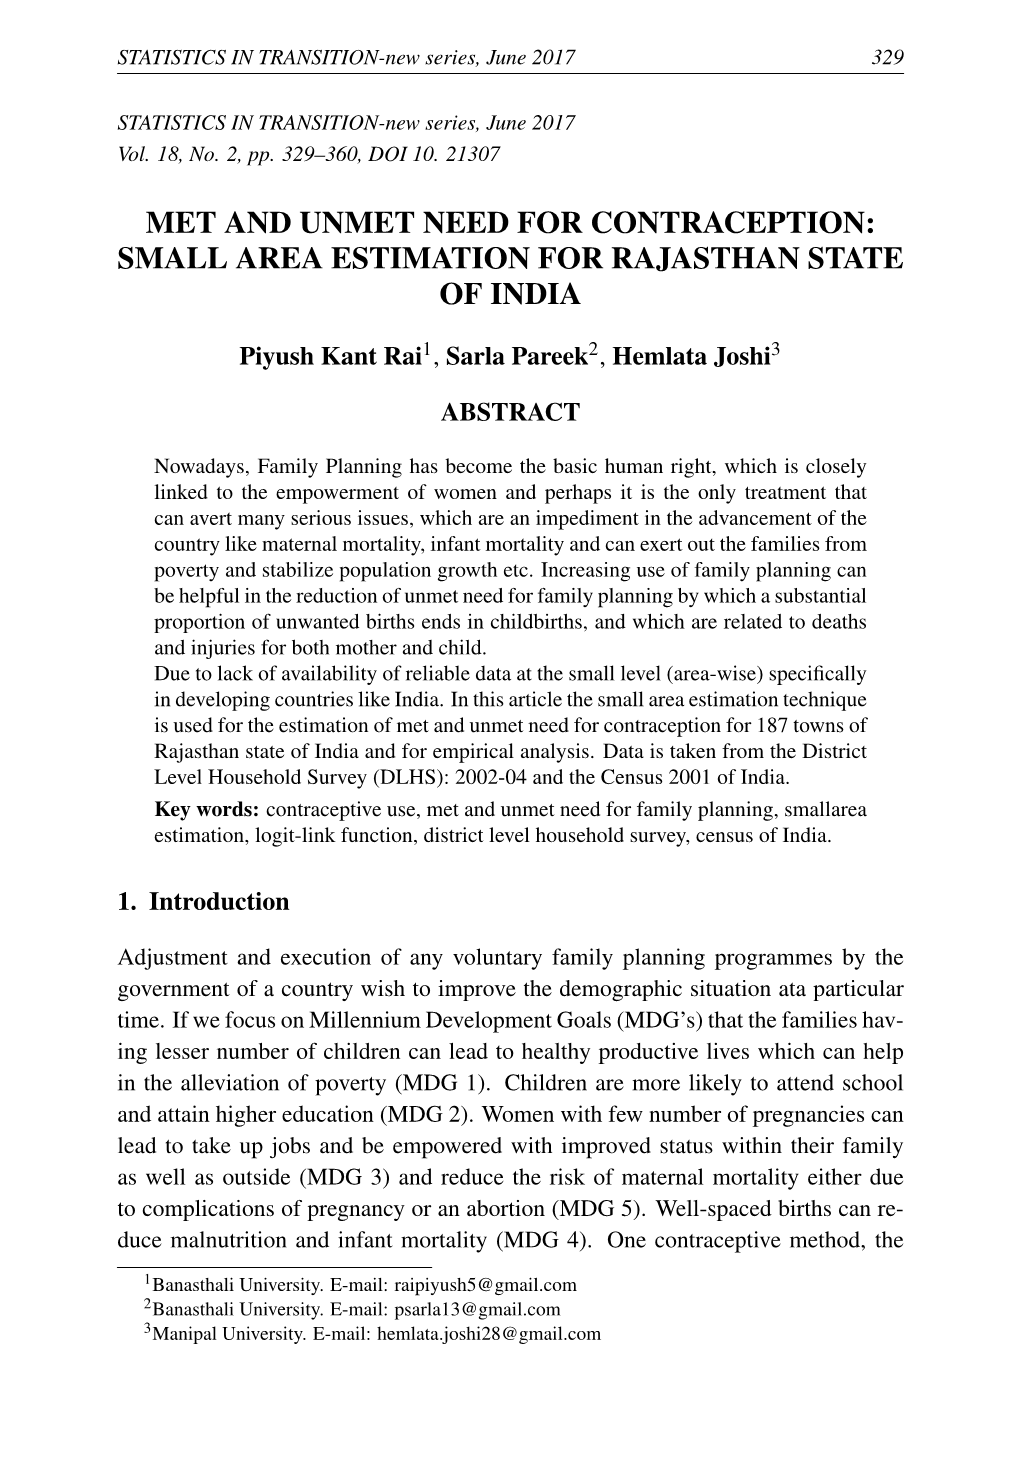 Met and Unmet Need for Contraception: Small Area Estimation for Rajasthan State of India